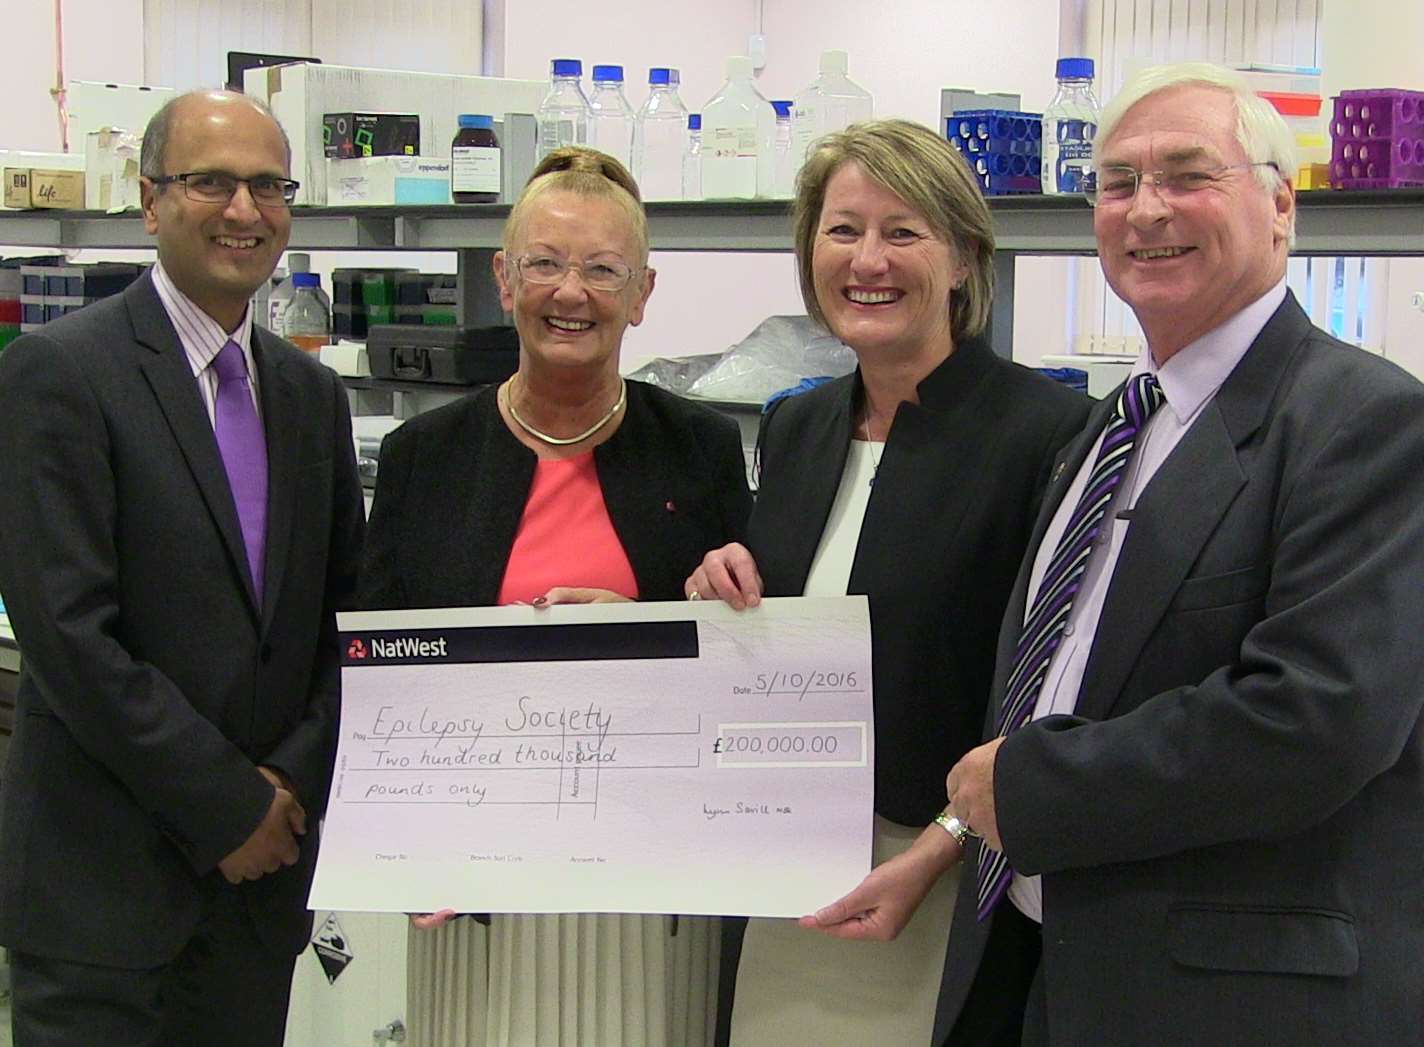 Fred and Lynn Savill present a cheque for £200,000 to Epilepsy Society at the charity's research centre in Buckinghamshire. From left to right: Professor Sanjay Sisodiya, director of genomics at Epilepsy Society; Lynn Savill; Rosemarie Finley, chief executive at the charity; and Fred Savill.